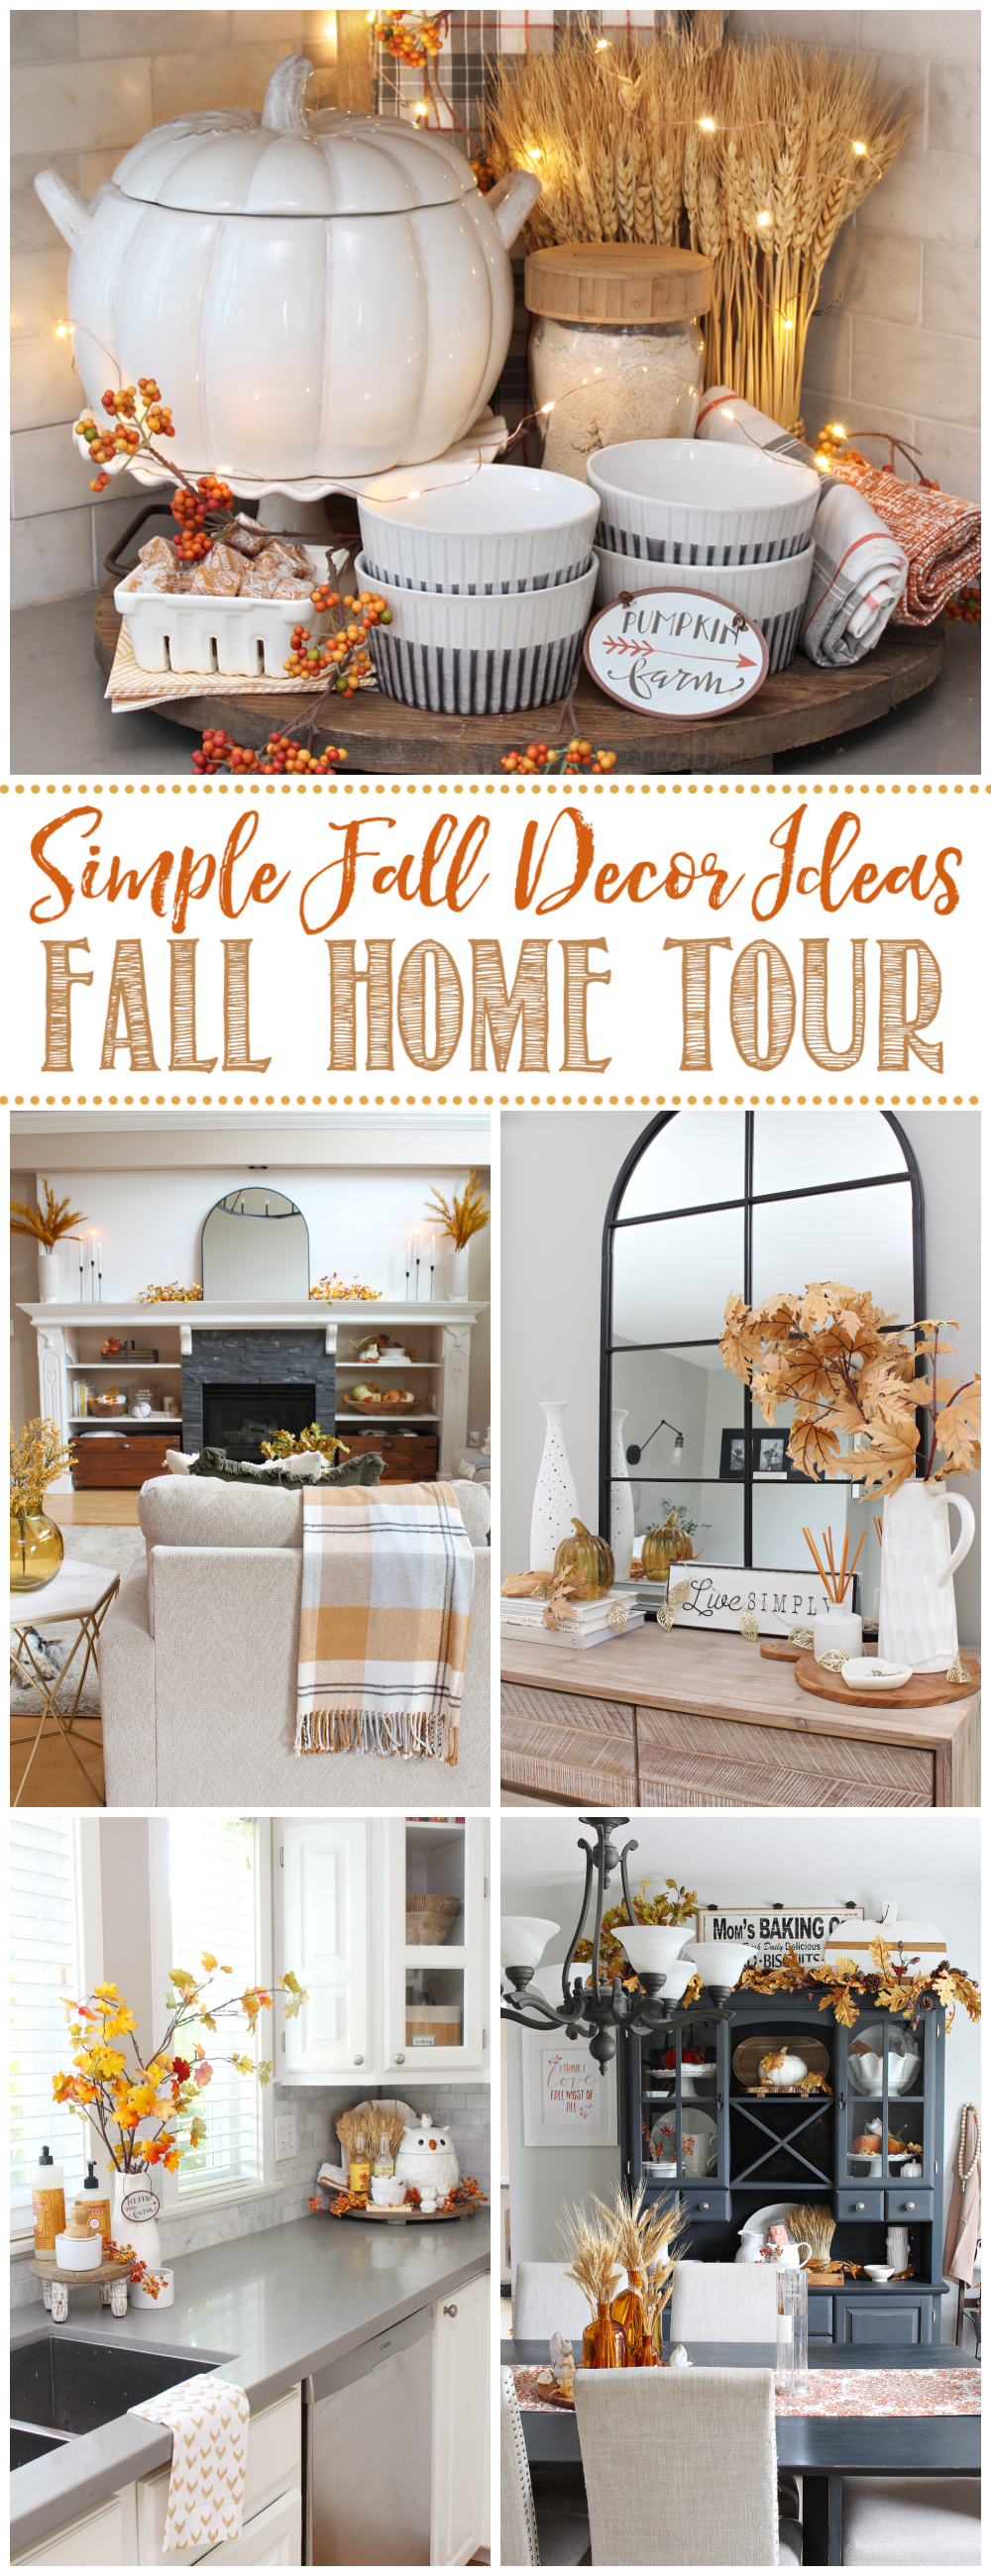 Collage of fall home decor ideas.